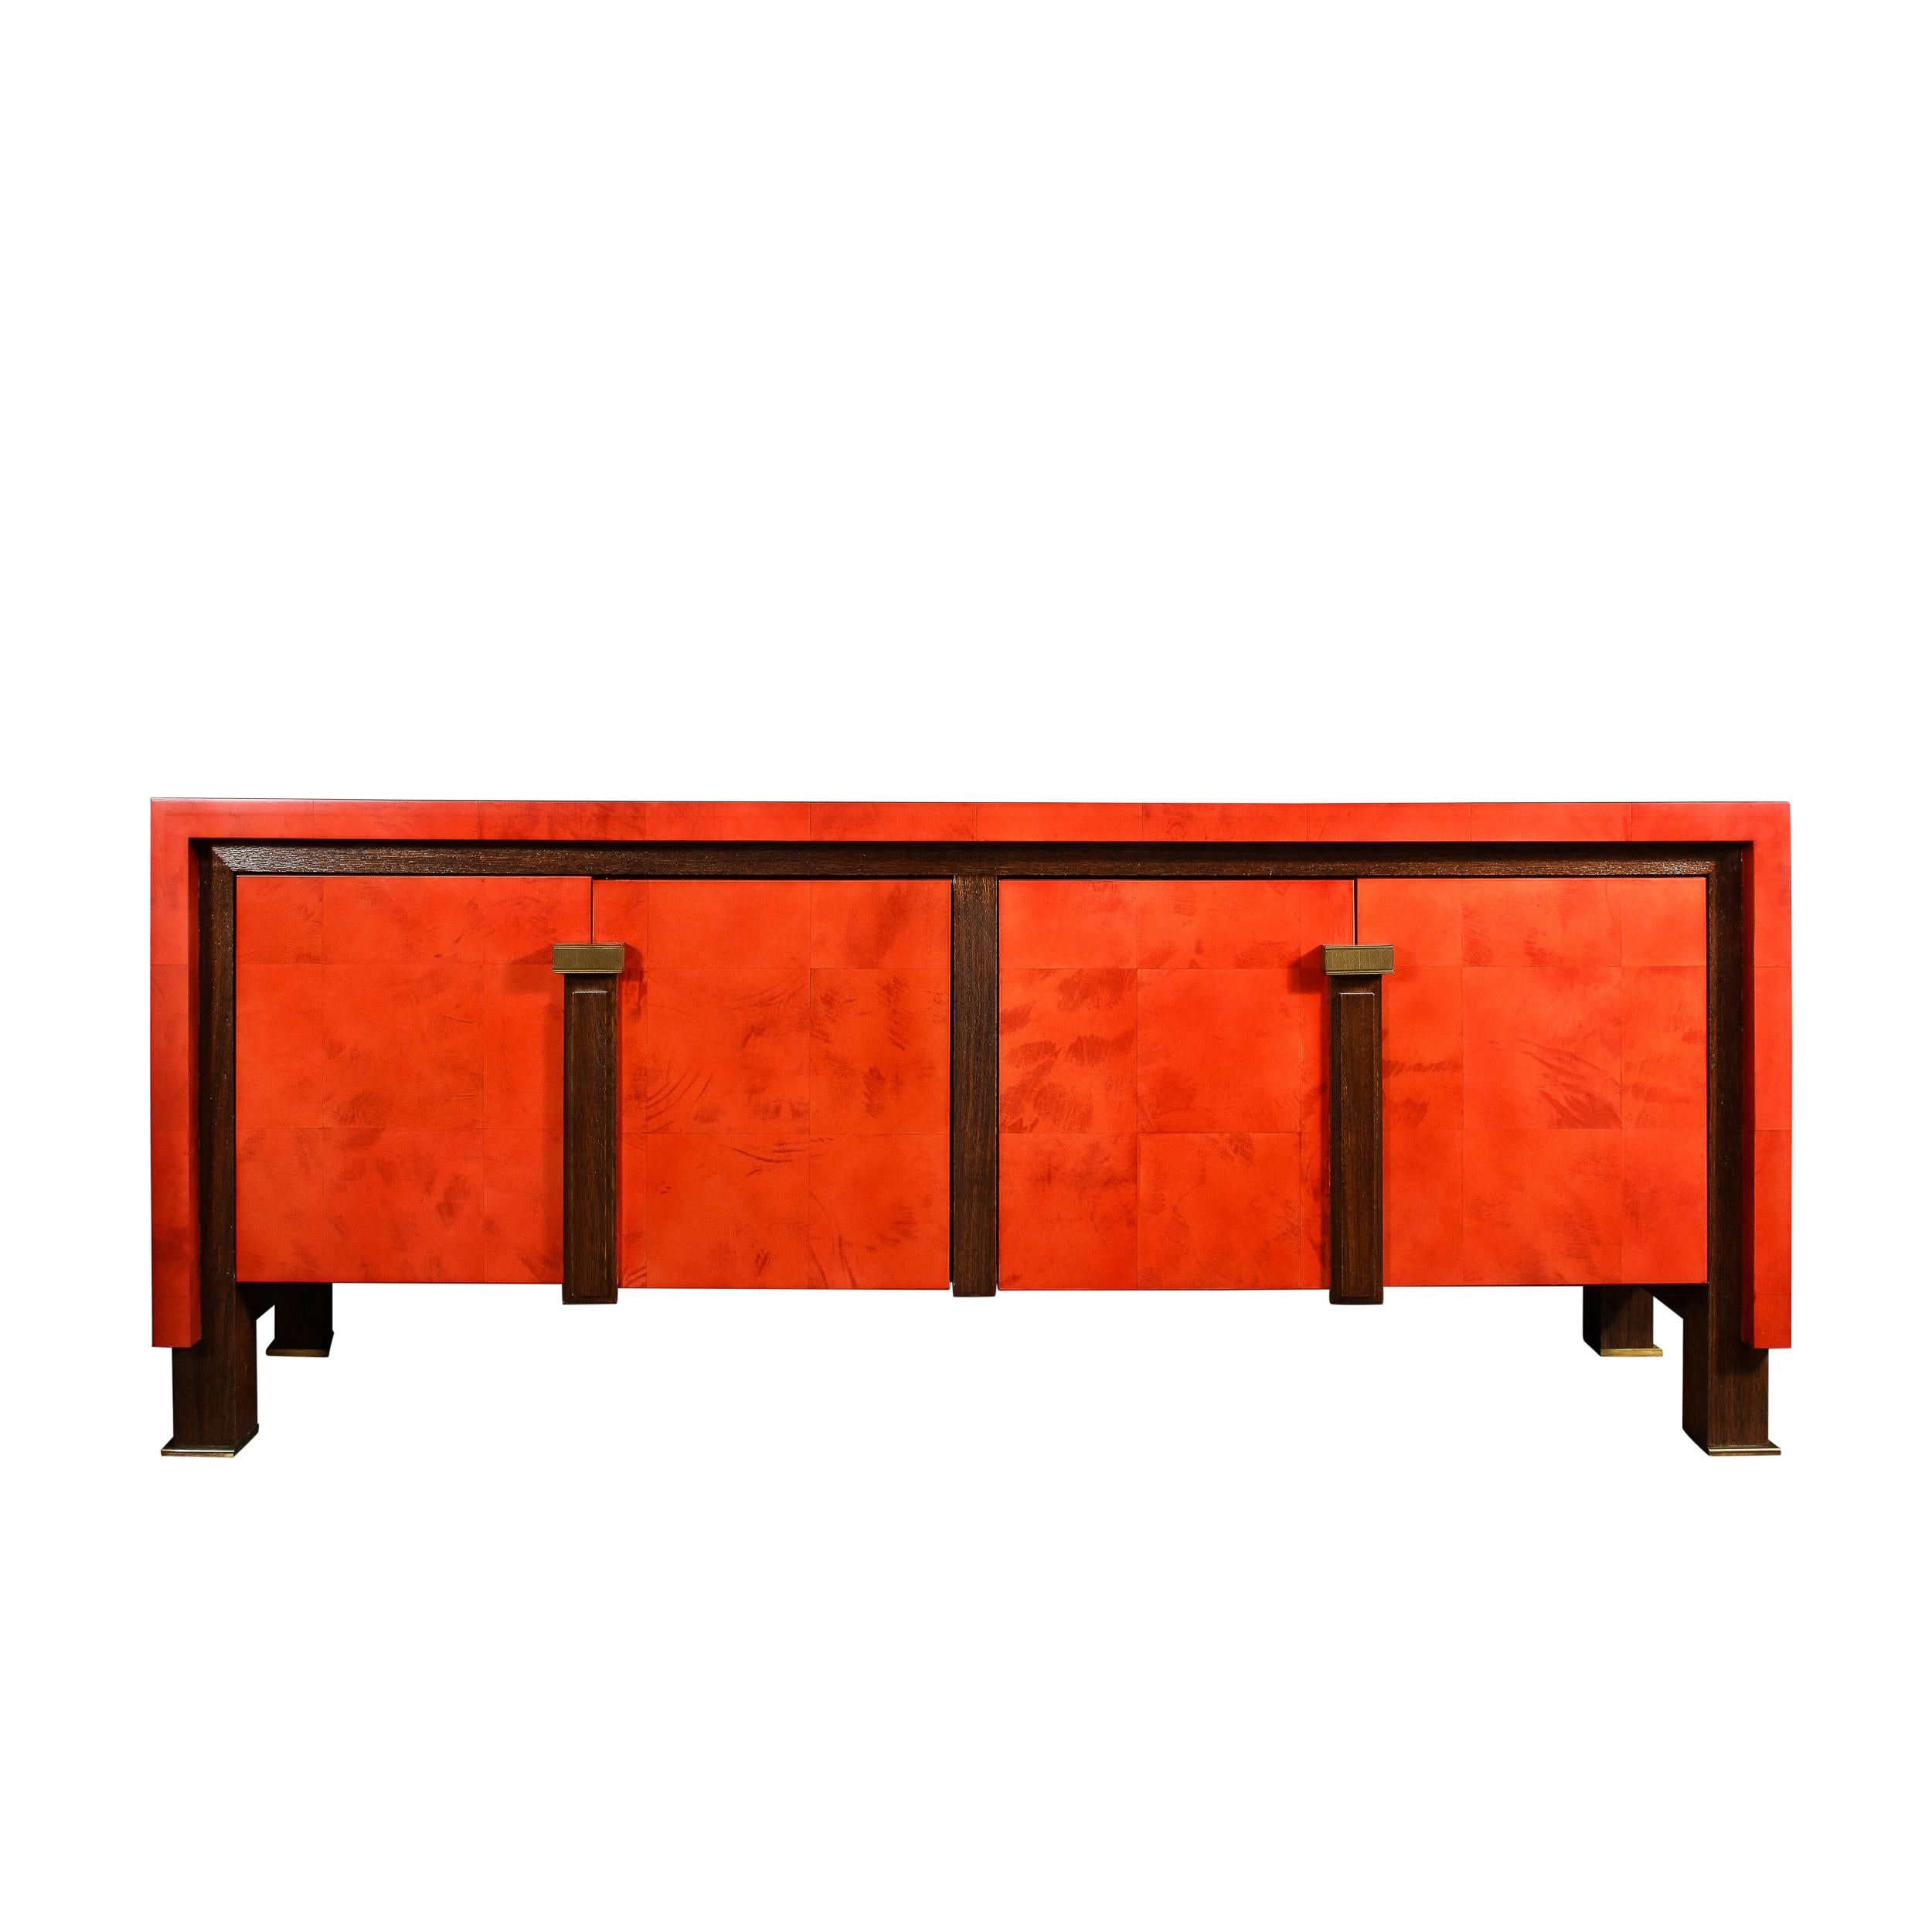 This stunning and sumptuous modernist sideboard was realized in the United States during the latter half of the 20th century. Inspired by the work of the legendary design luminary Karl Springer, this sideboard offers a volumetric rectangular body